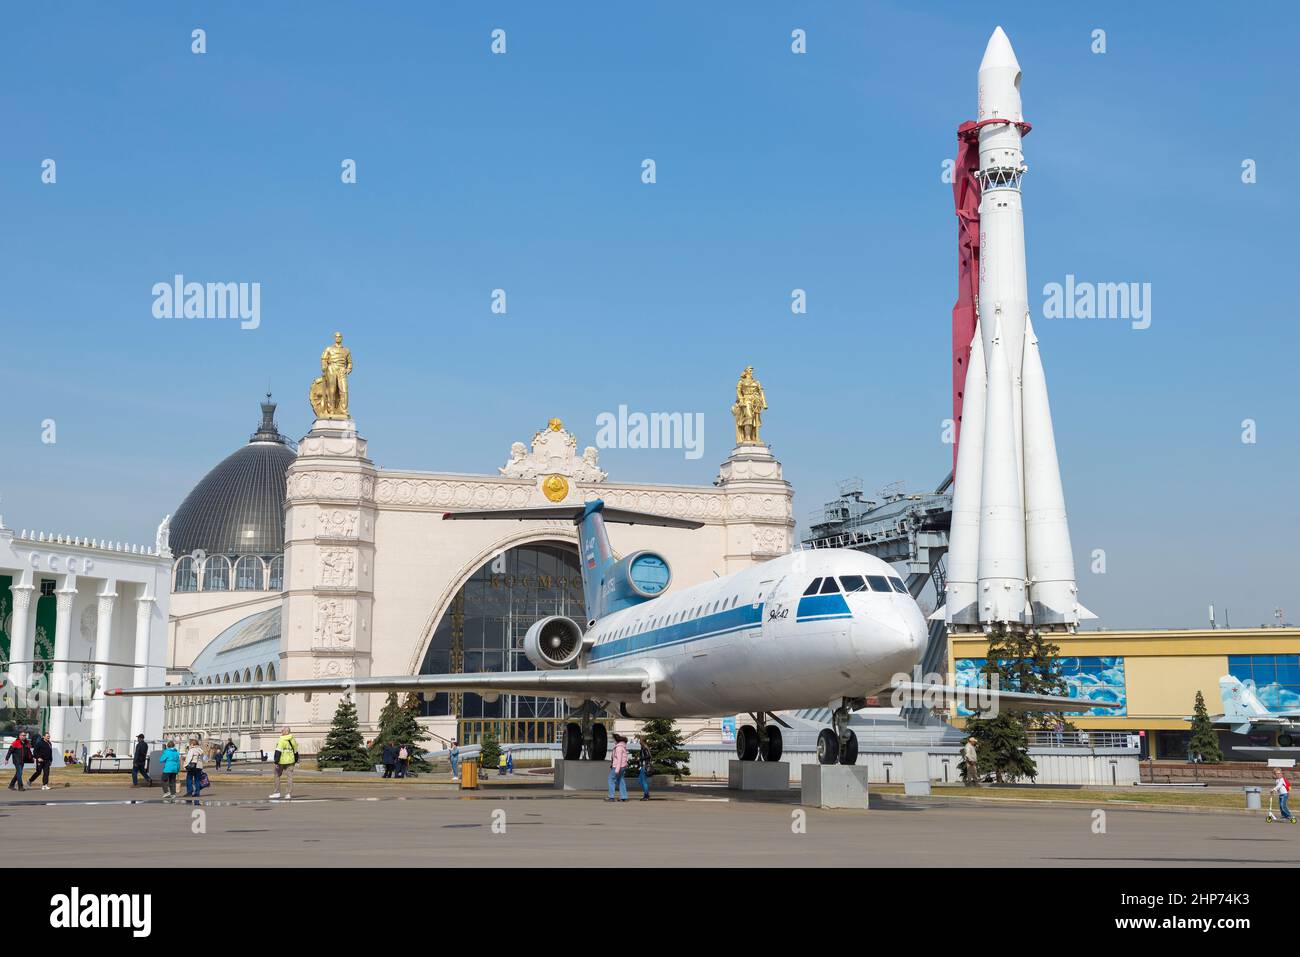 MOSCOW, RUSSIA - APRIL 14, 2020: Yak-42 aircraft and Vostok space rocket on the territory of the All-Russian Exhibition Center (VDNH) on April sunny d Stock Photo